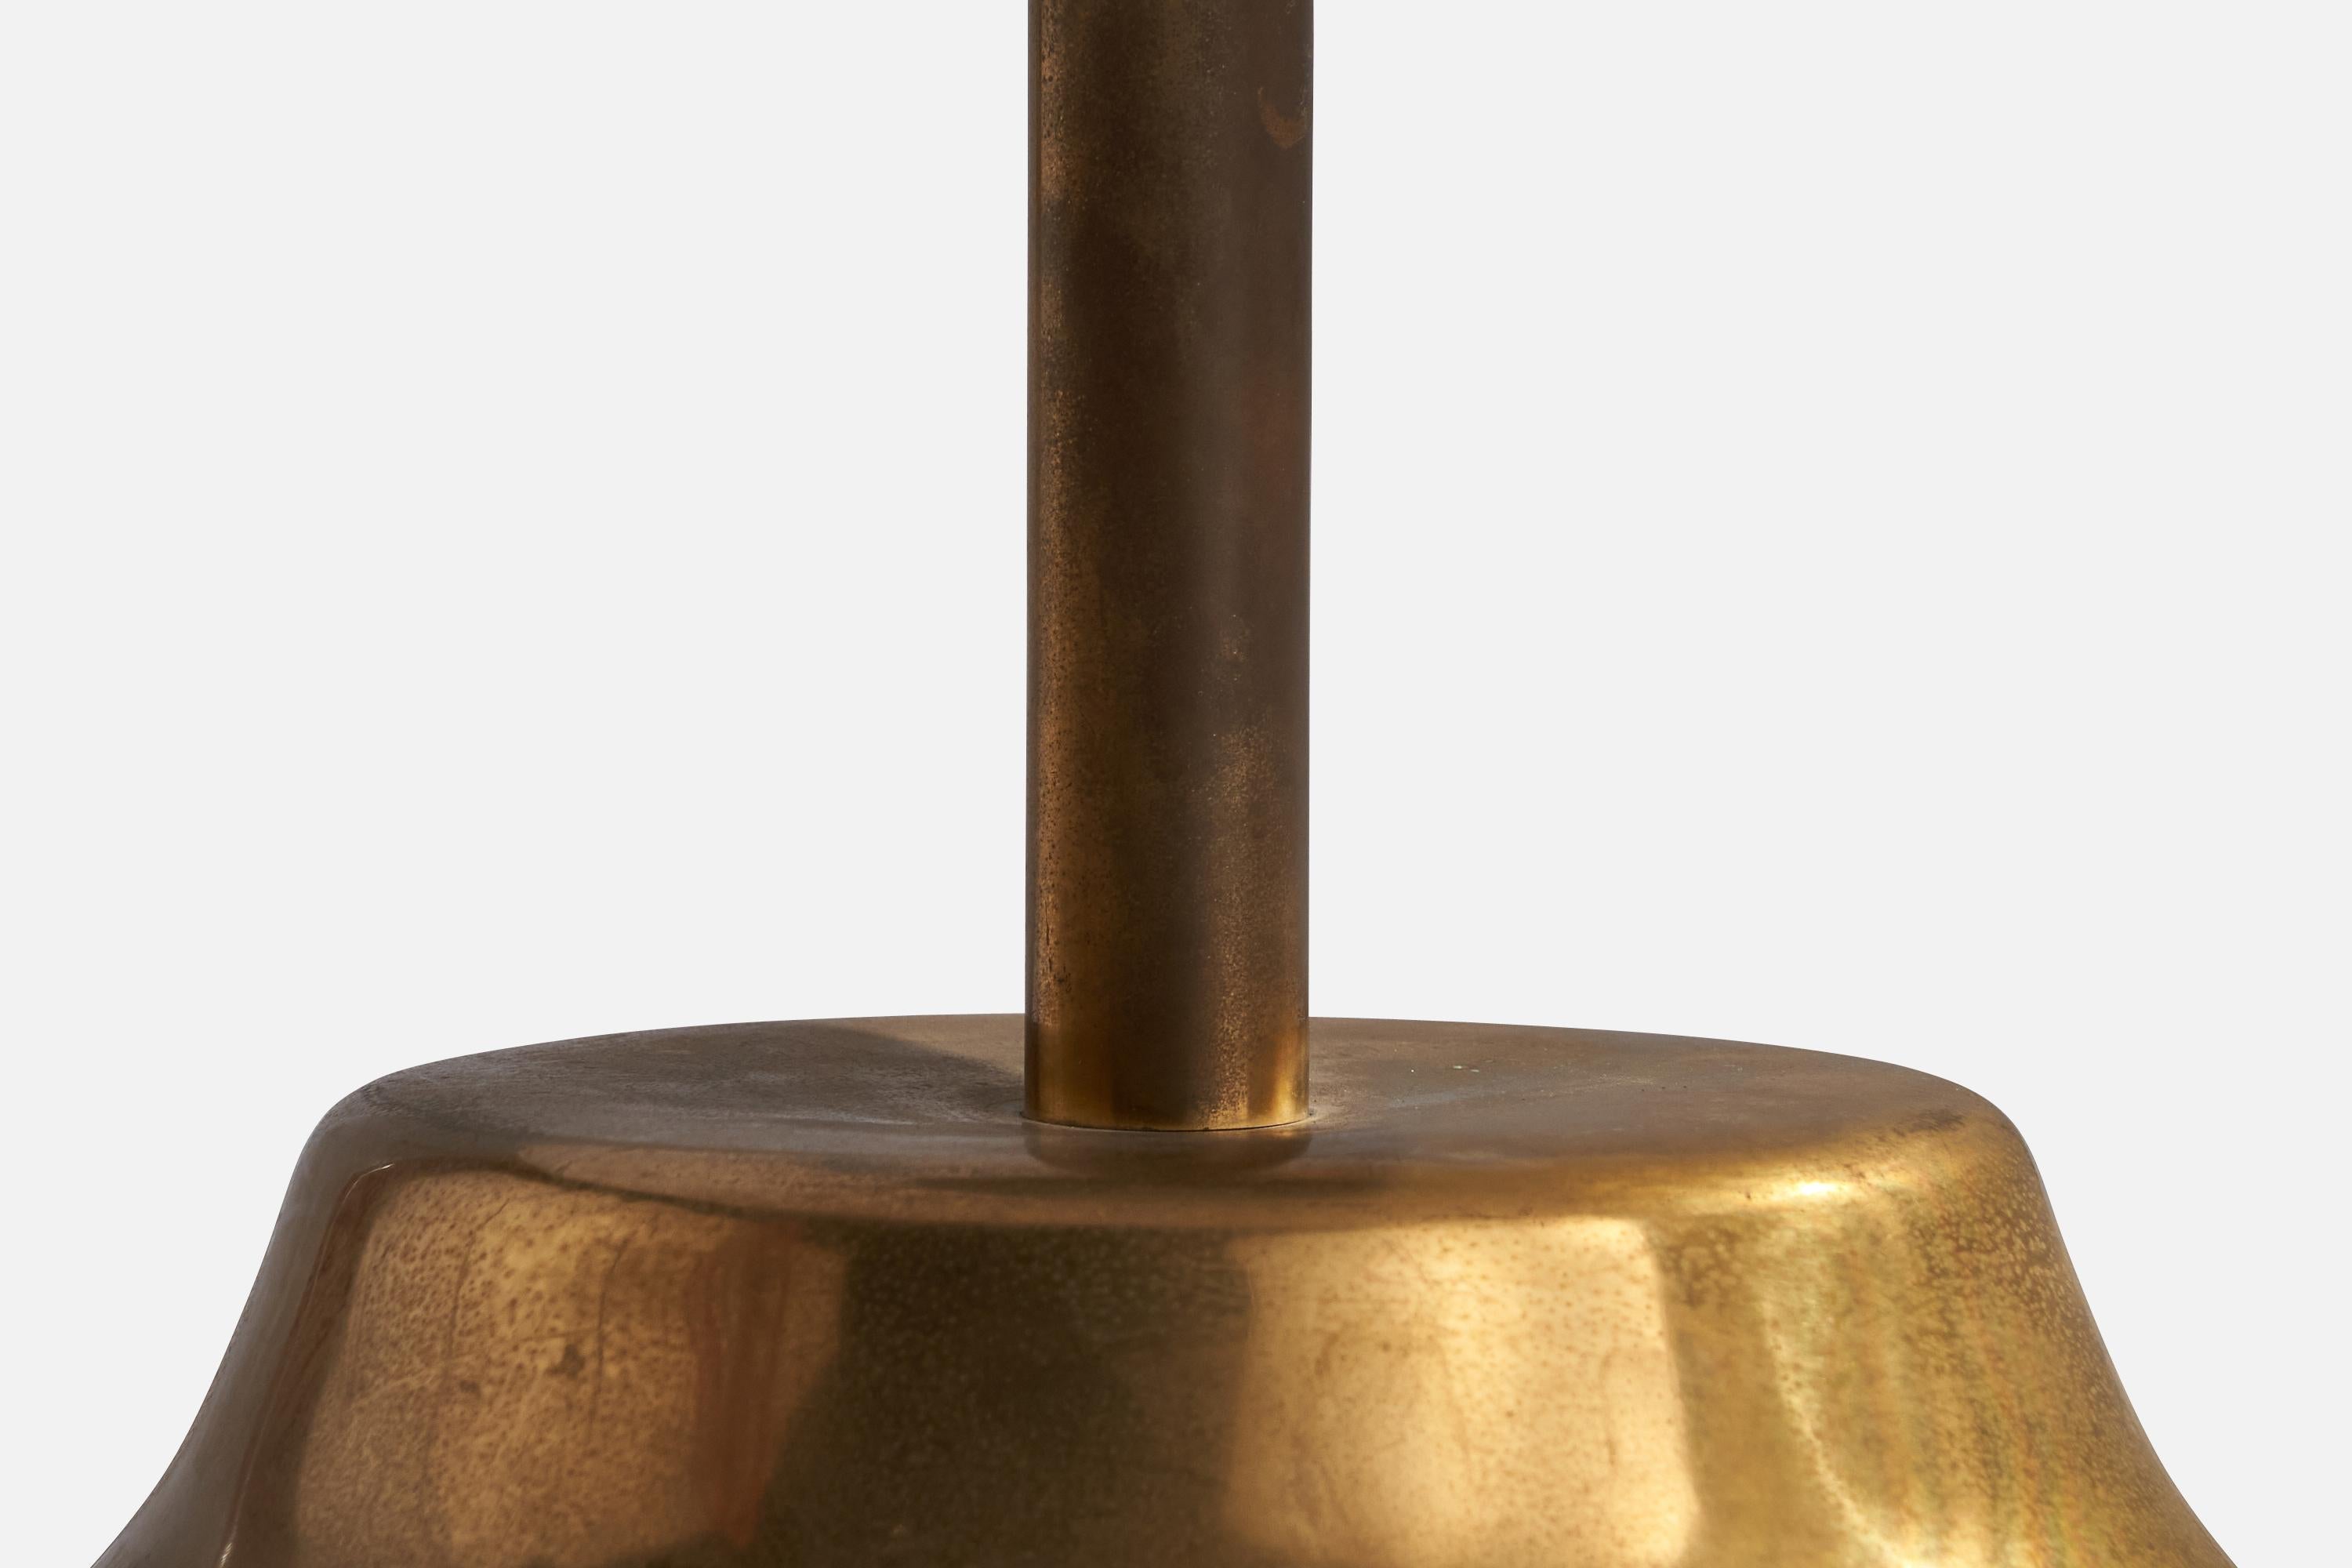 A brass table lamp designed by Tommasso Barbi and produced by G&G Disegno, Italy, c. 1970s.

Dimensions of Lamp (inches): 23” H x 11.5” Diameter
Dimensions of Shade (inches): 10